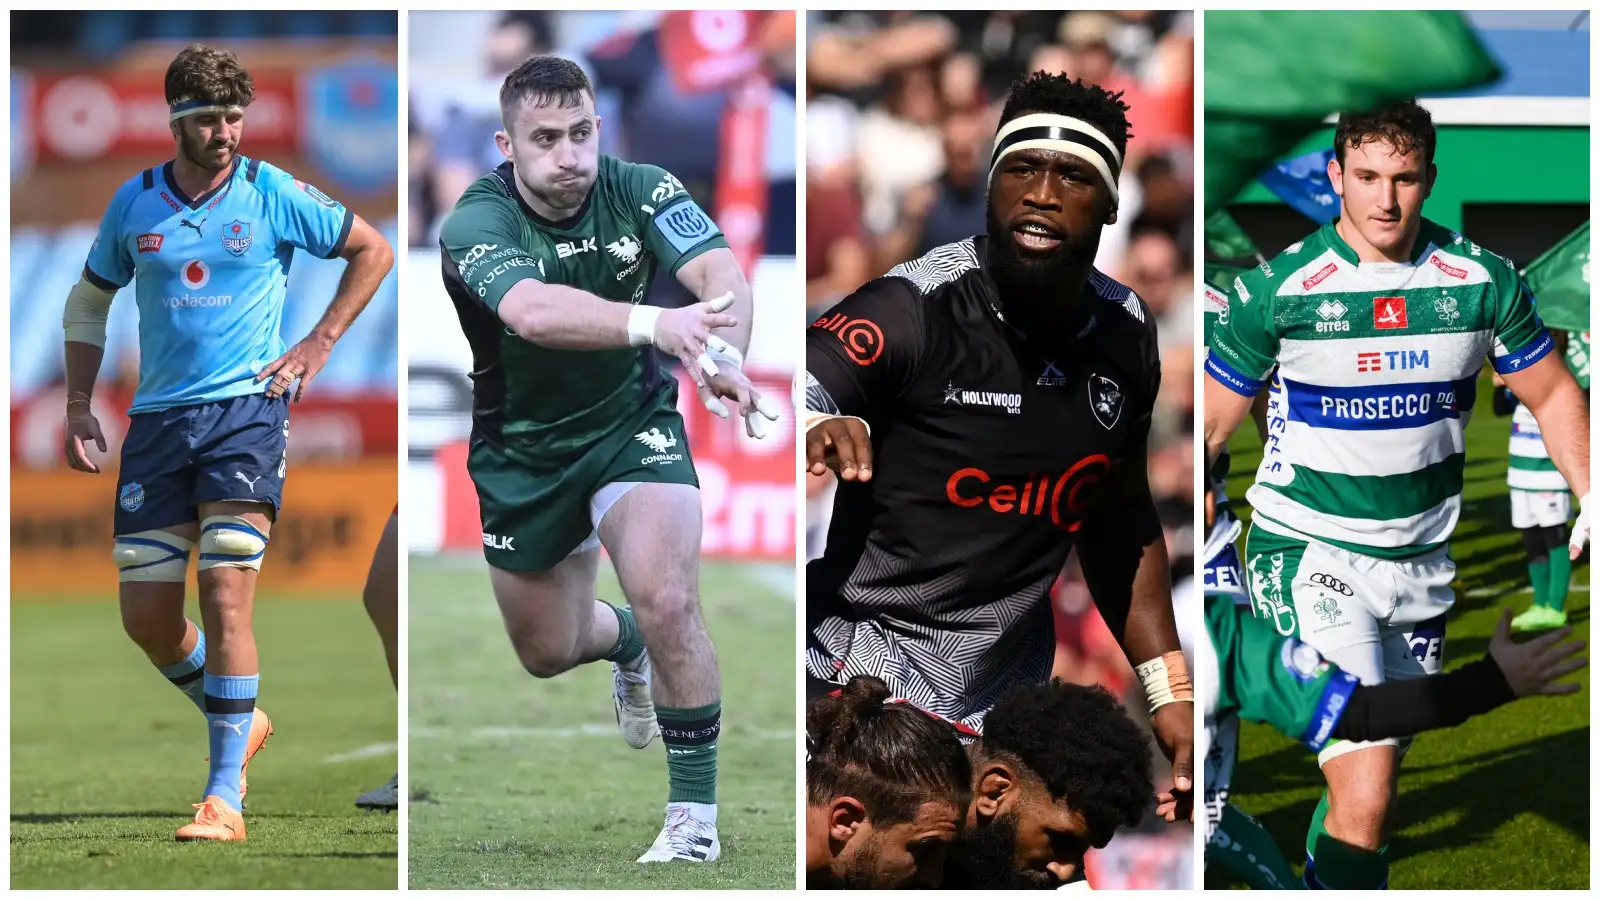 United Rugby Championship: Split with Nortje, Blade, Kolisi and Lamaro